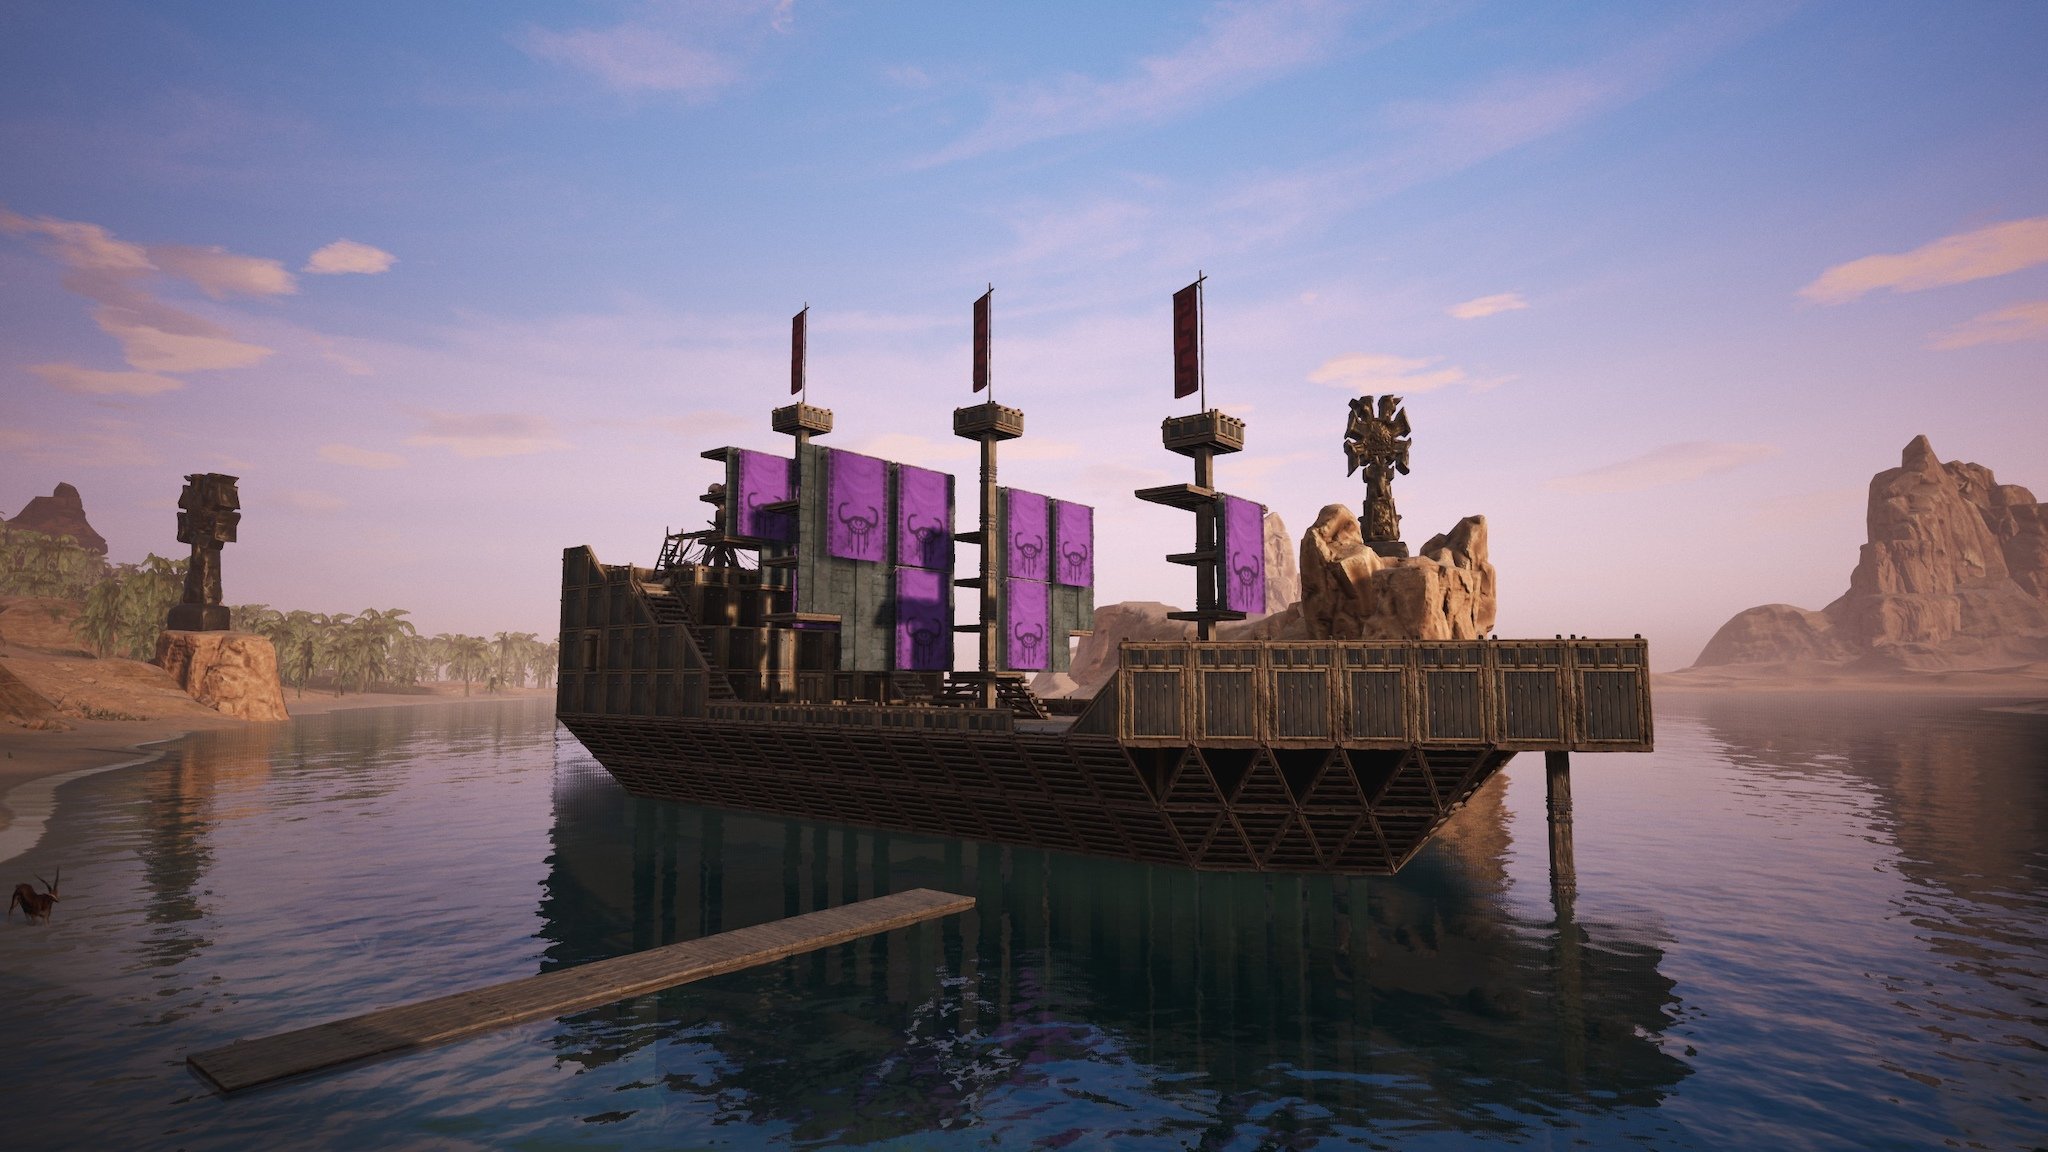 Conan Exiles on Twitter: "We have some amazingly creative people in our  community! Someone used the building system to create an entire boat,  complete with banners for sails, pillars for masts and